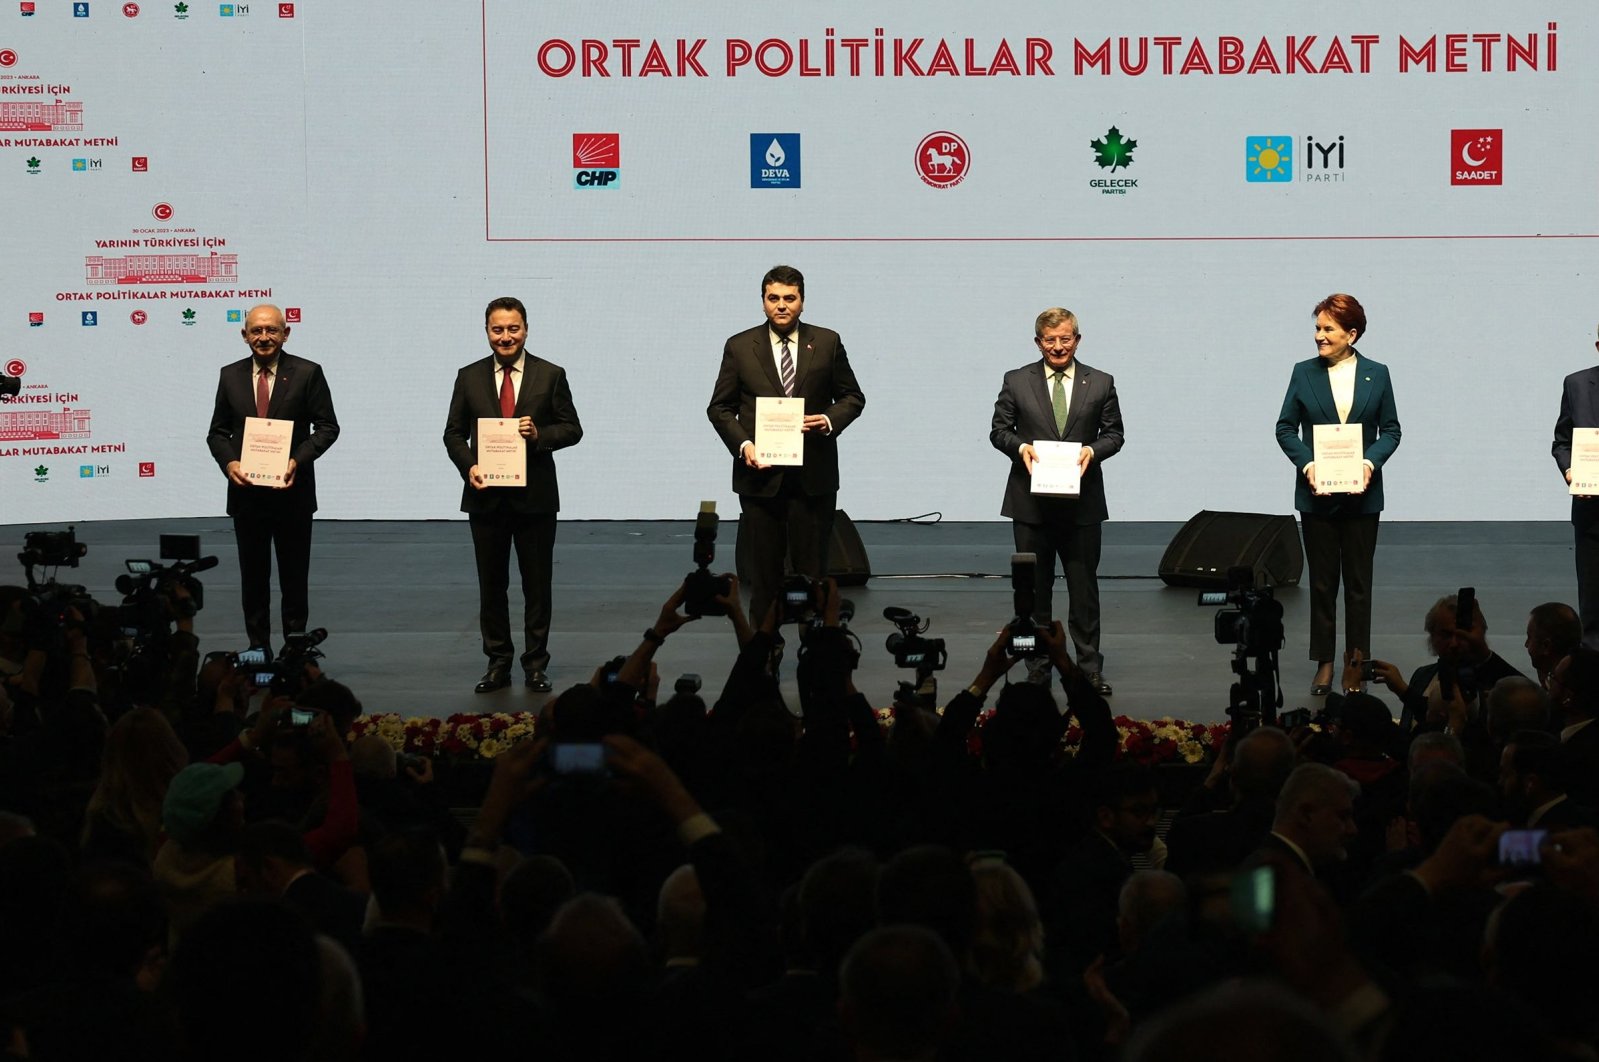 The leaders of the opposition bloc pose on stage before presenting the election program, in the capital Ankara, Türkiye, Jan. 30, 2023. (AFP Photo)